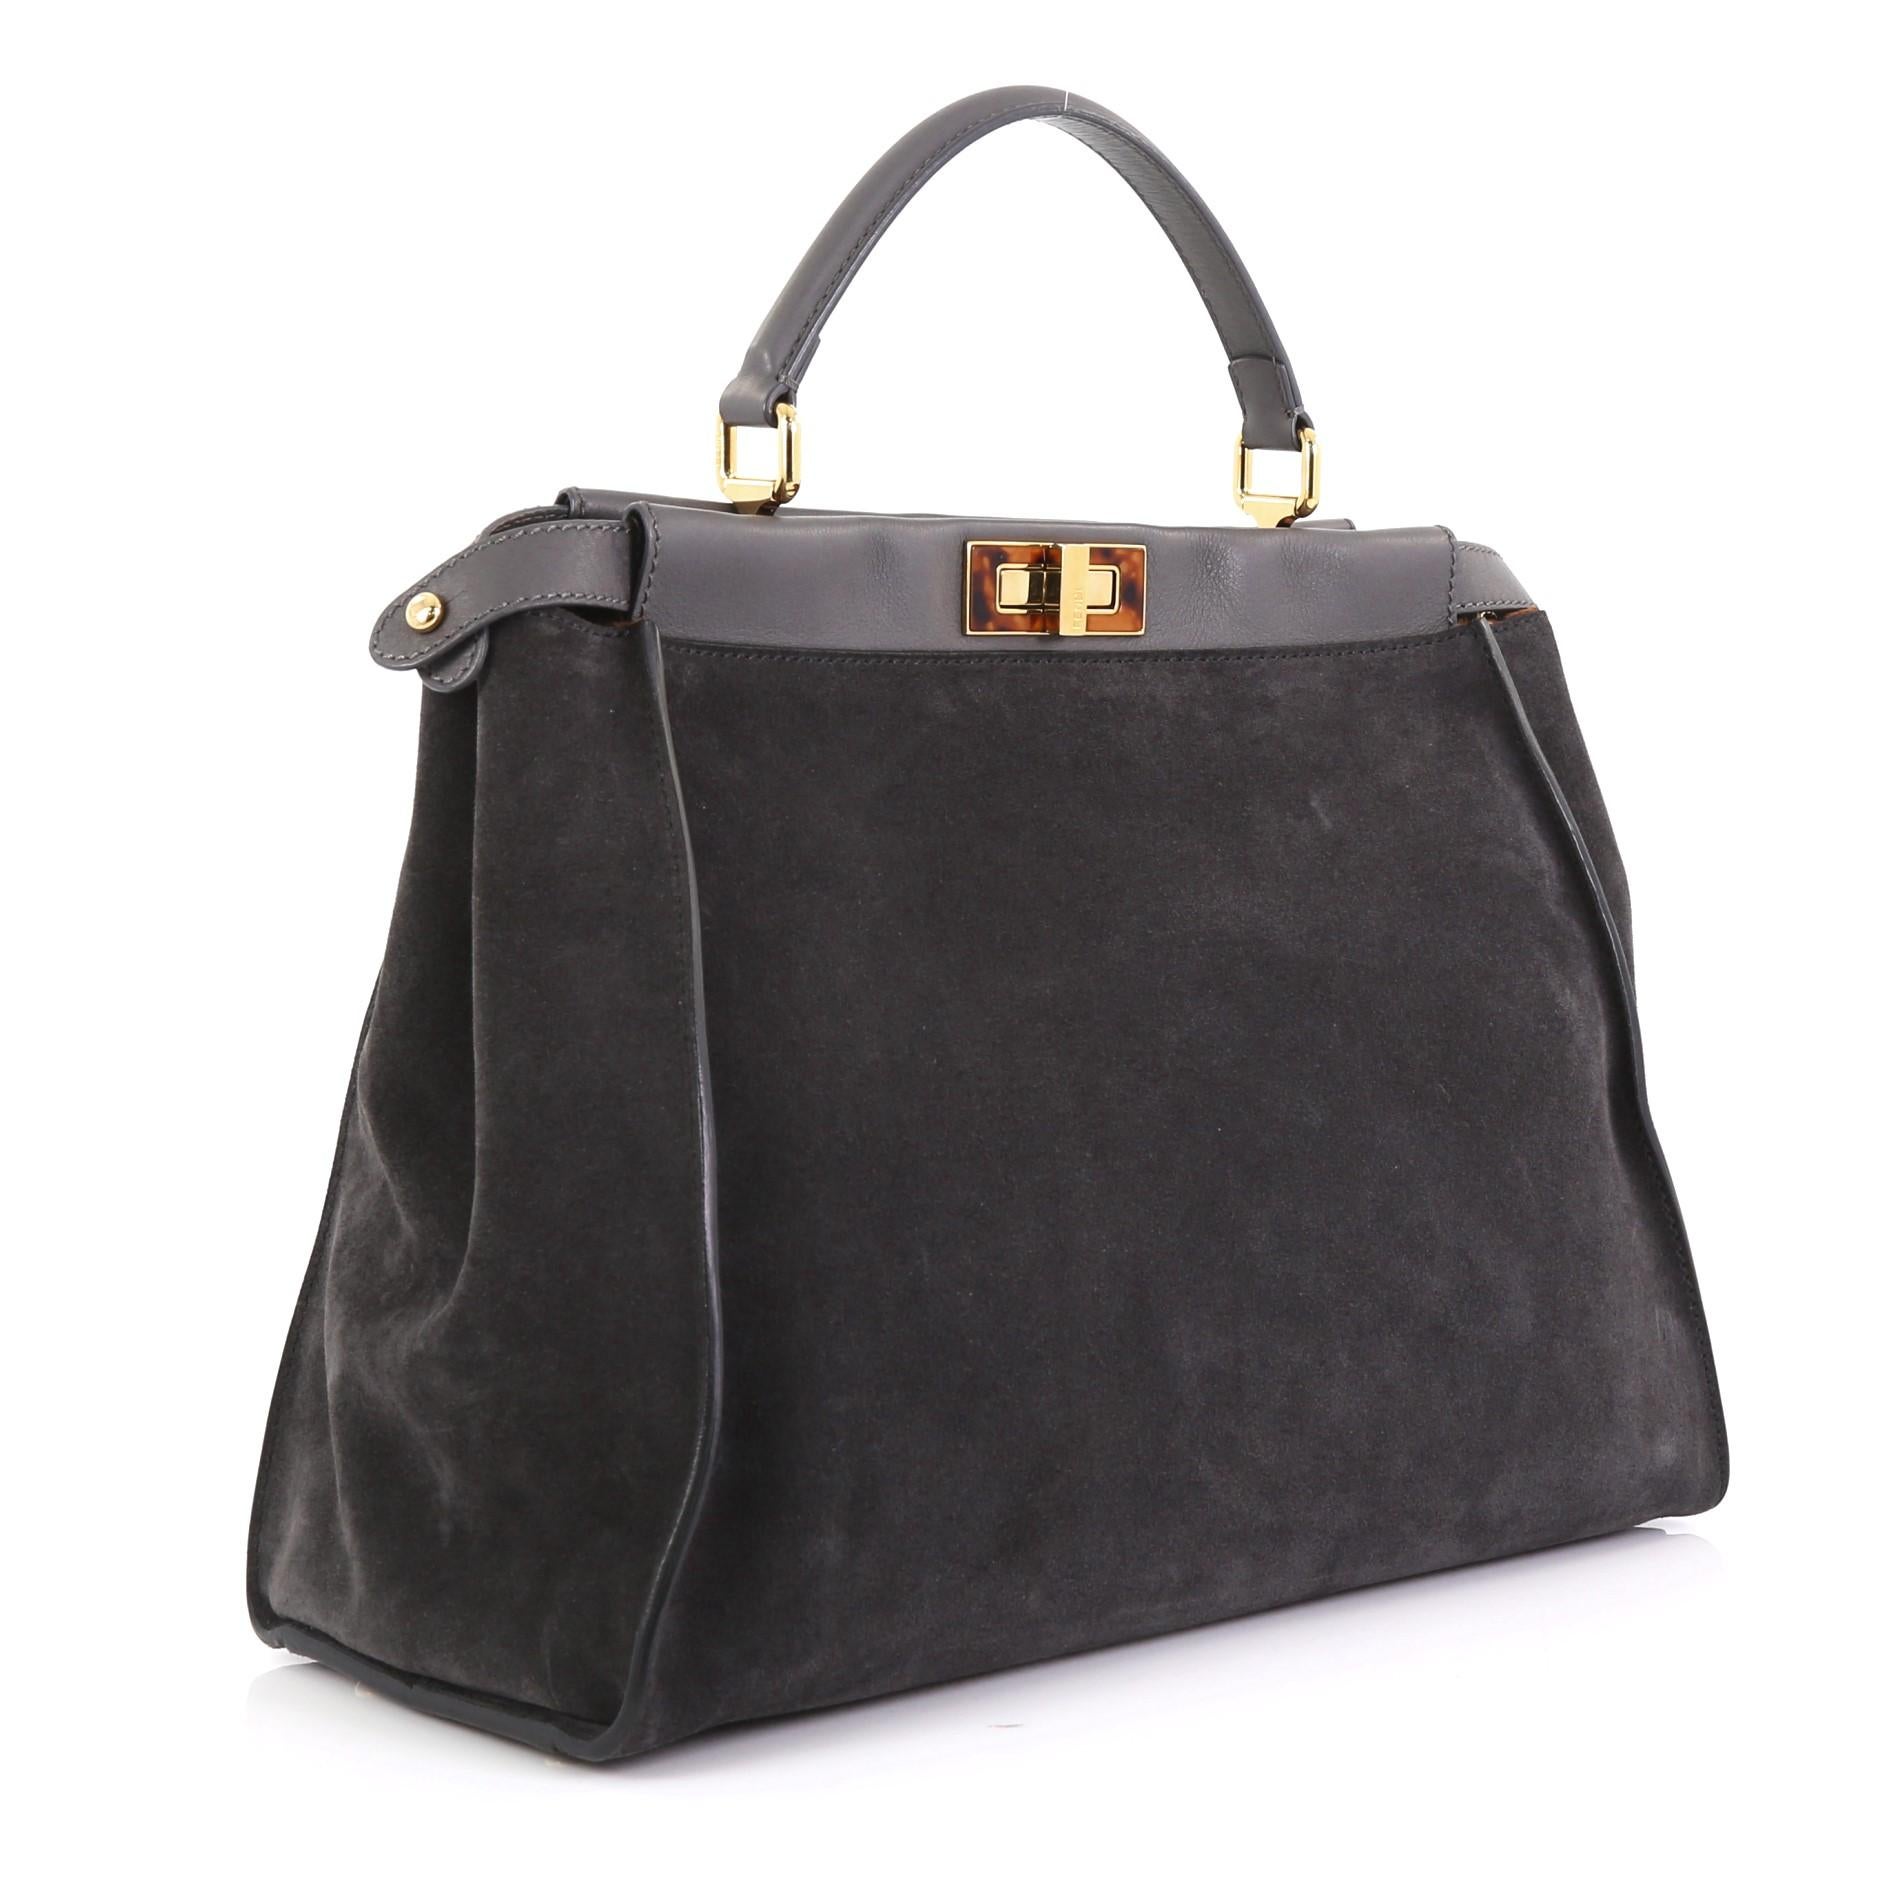 This Fendi Peekaboo Bag Suede with Calf Hair Interior Large, crafted from gray sude, features short leather top handle, protective base studs, and gold-tone hardware. Its two compartments with turn-lock and zip closures open to a gray raw leather